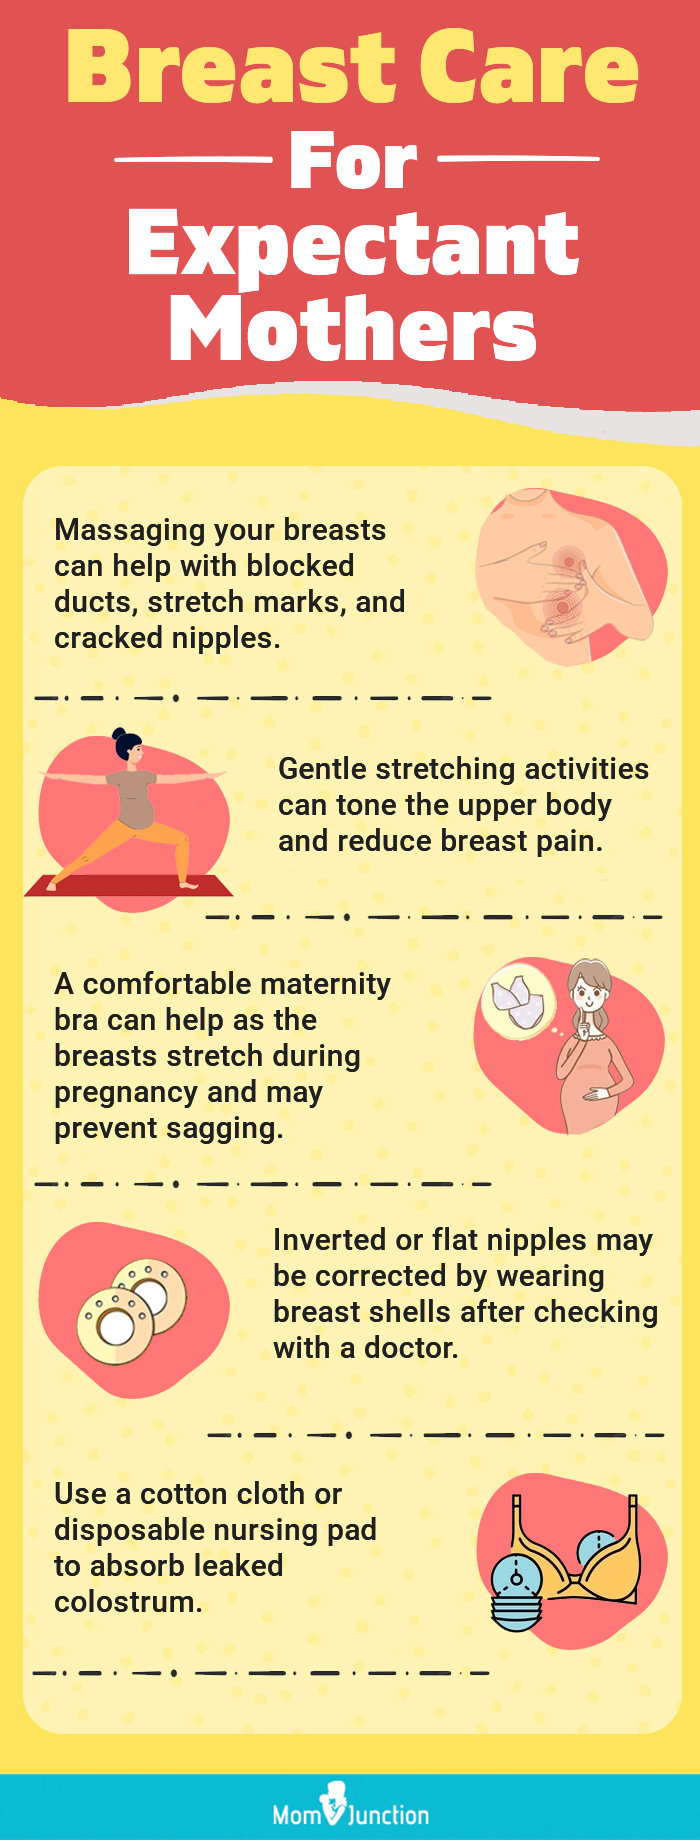 Flat Nipples: What are Flat Nipples and how can they be corrected? Ask The  Expert